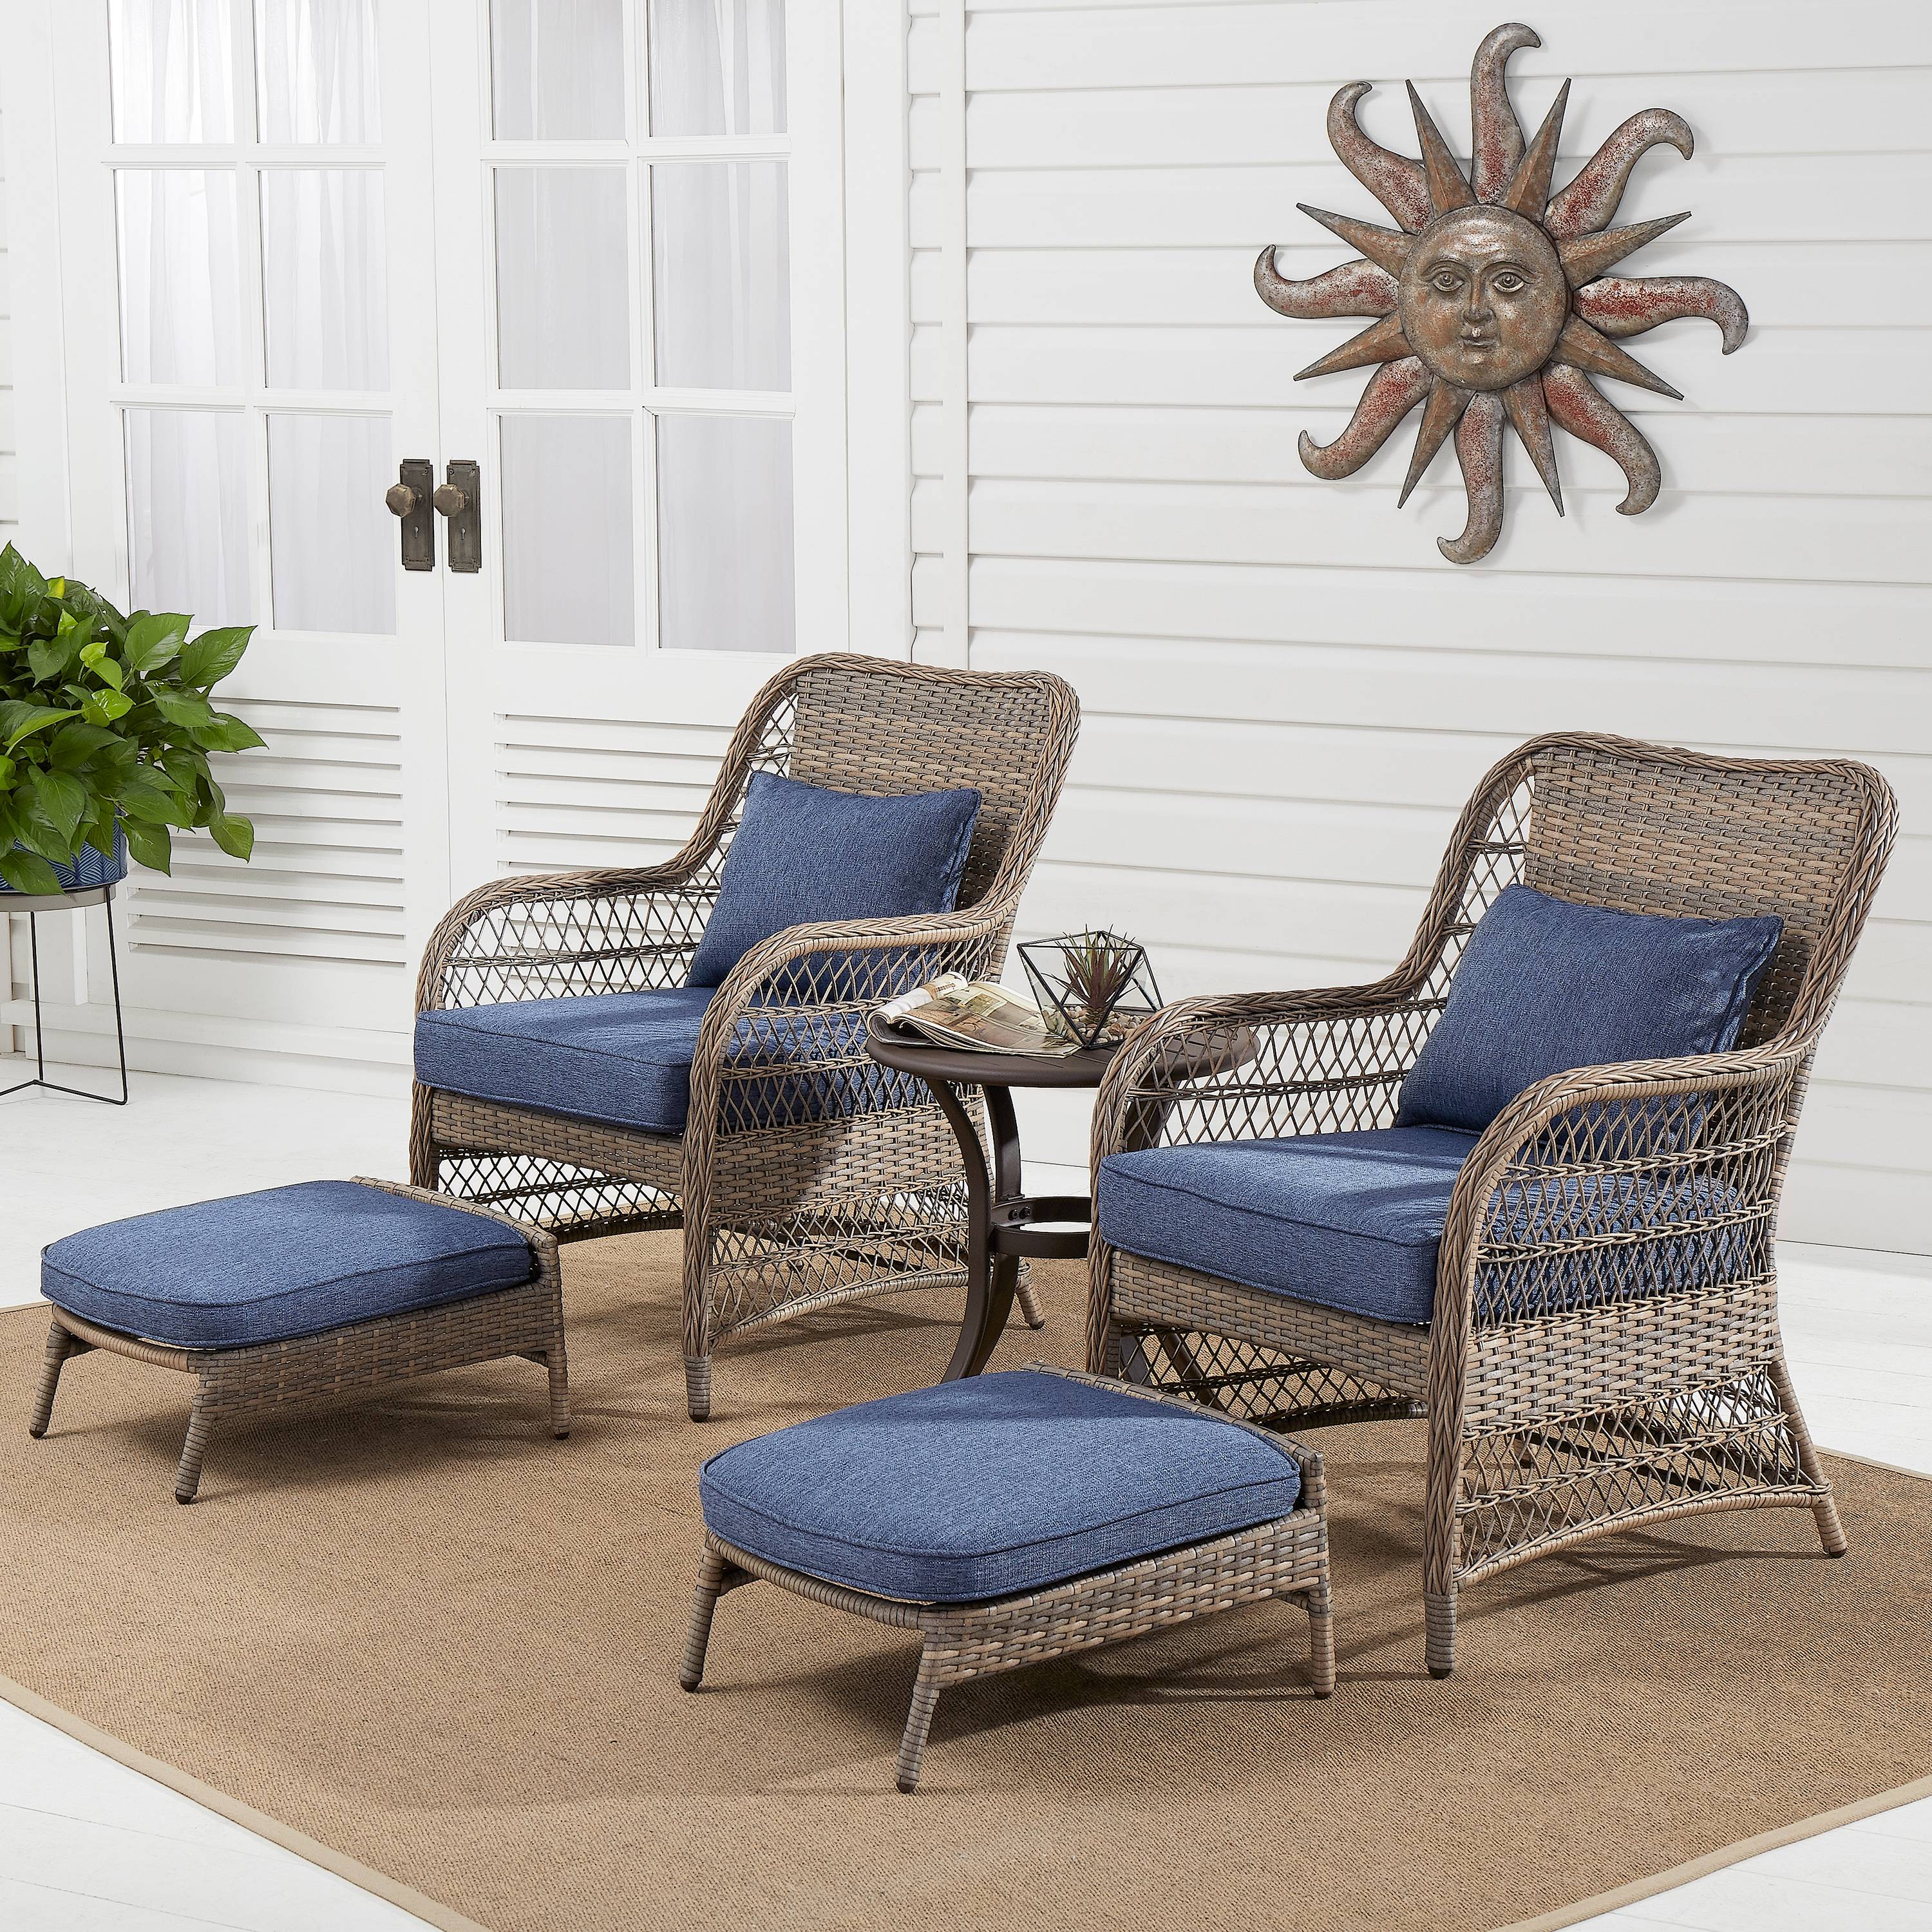 Better Homes & Gardens Auburn 5-Piece Wicker Patio Chat Set with Blue Cushions - image 1 of 8